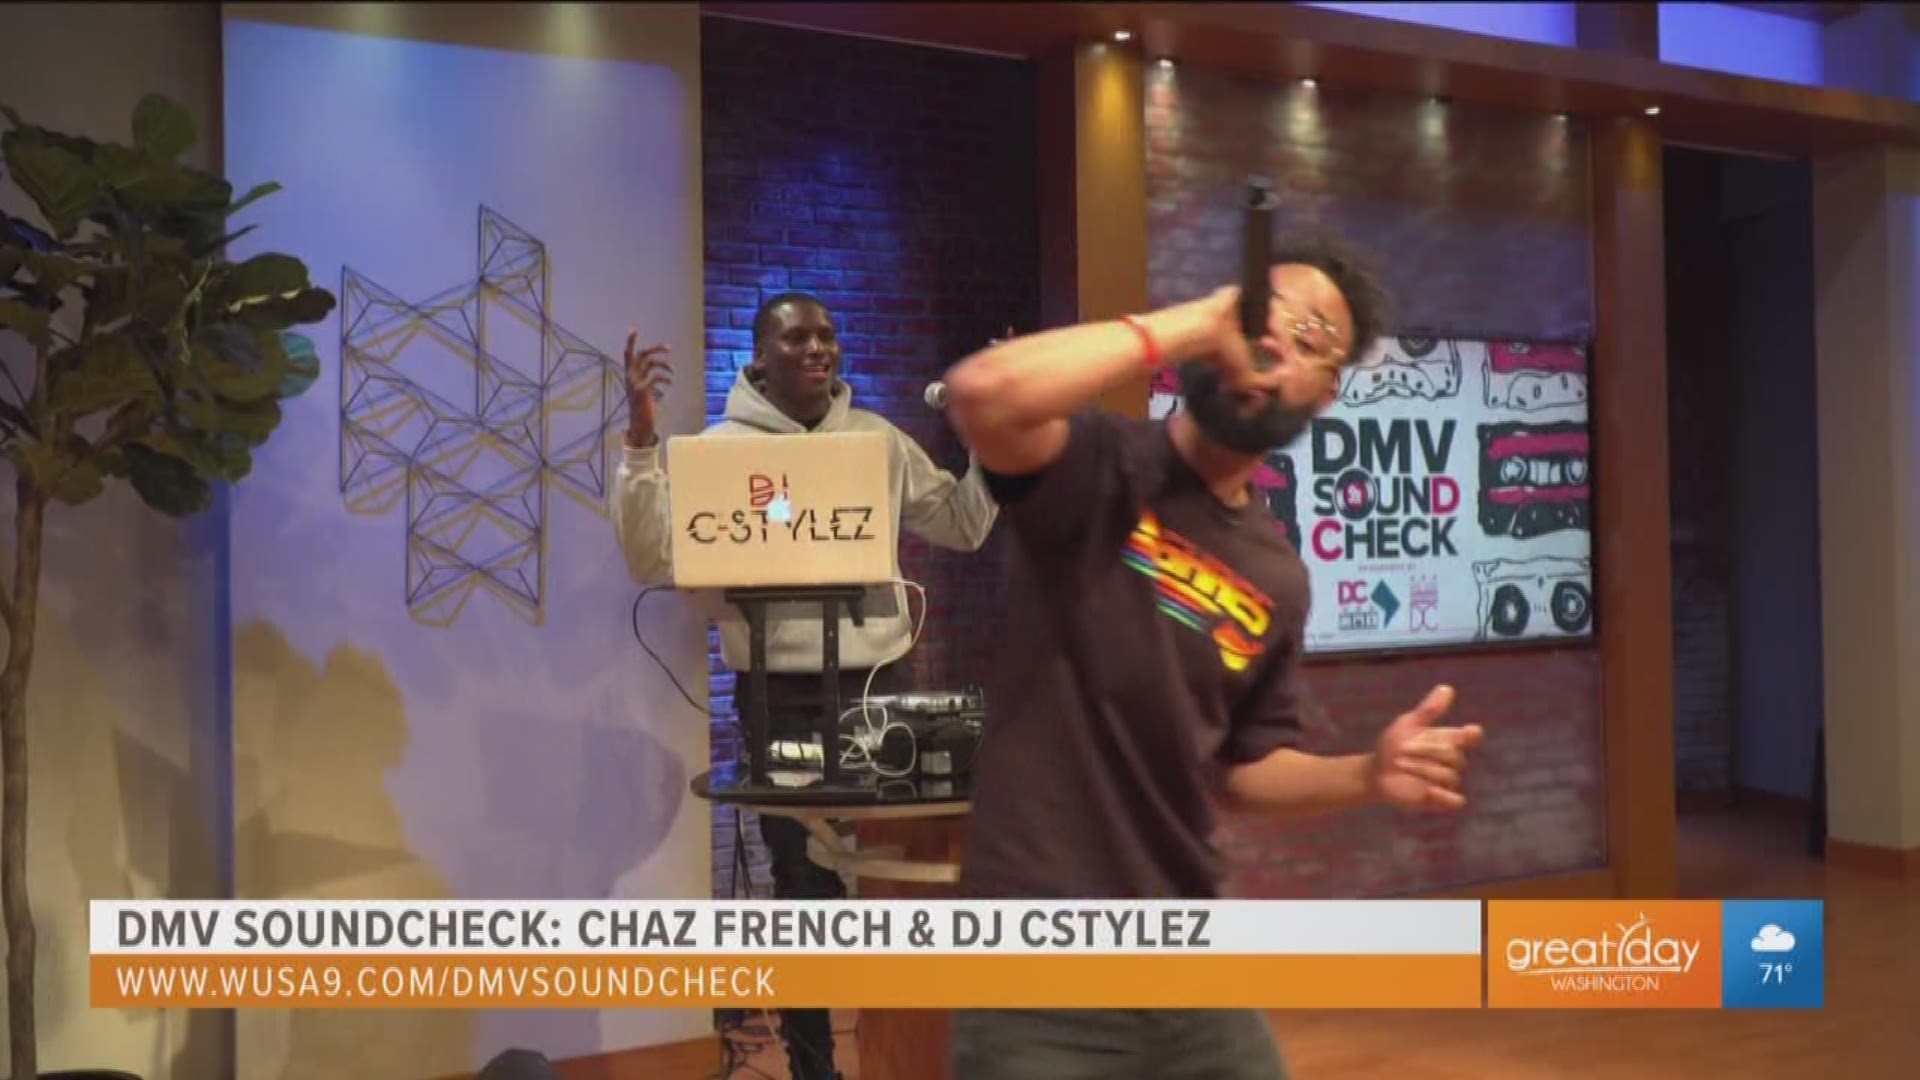 Chaz French and DJ C Stylez stop by the Great Day Studios for this week's DMV Soundcheck.